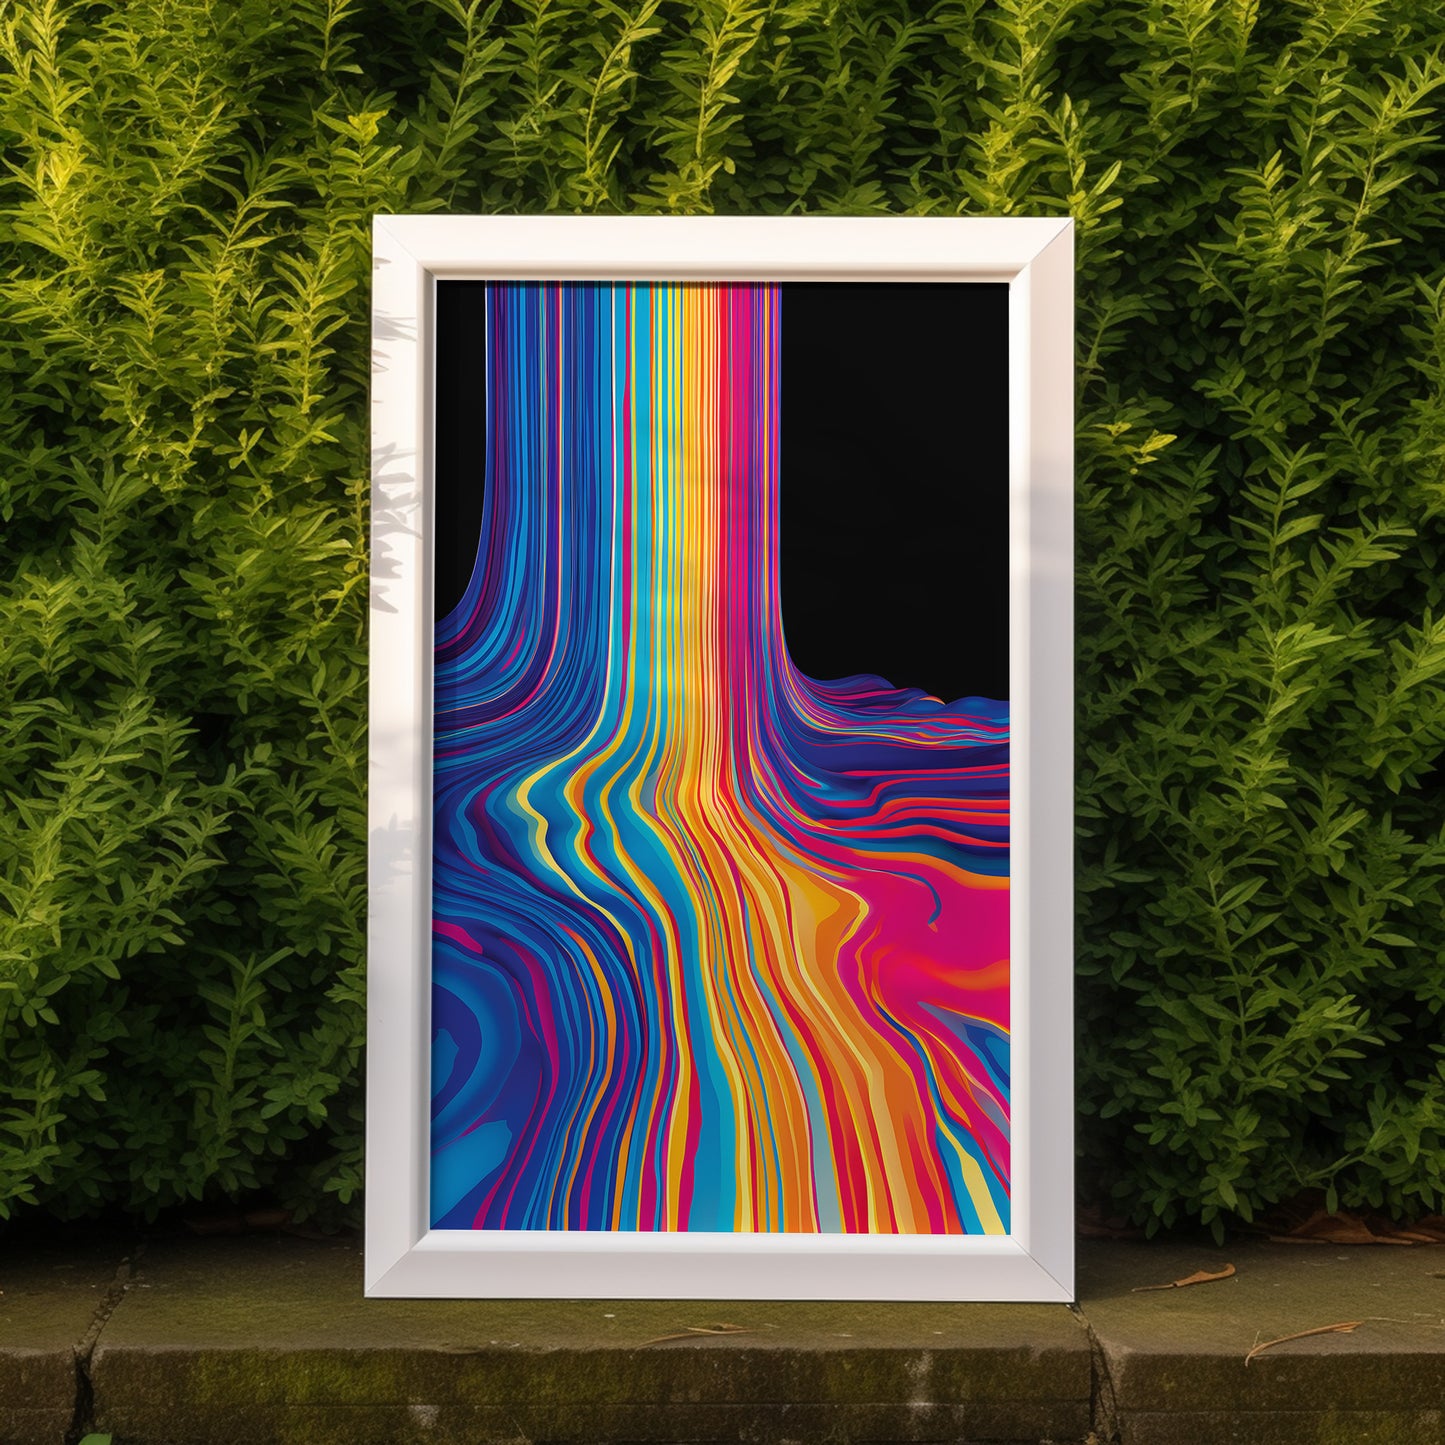 A colorful abstract painting with flowing lines in a white frame against a hedge background.